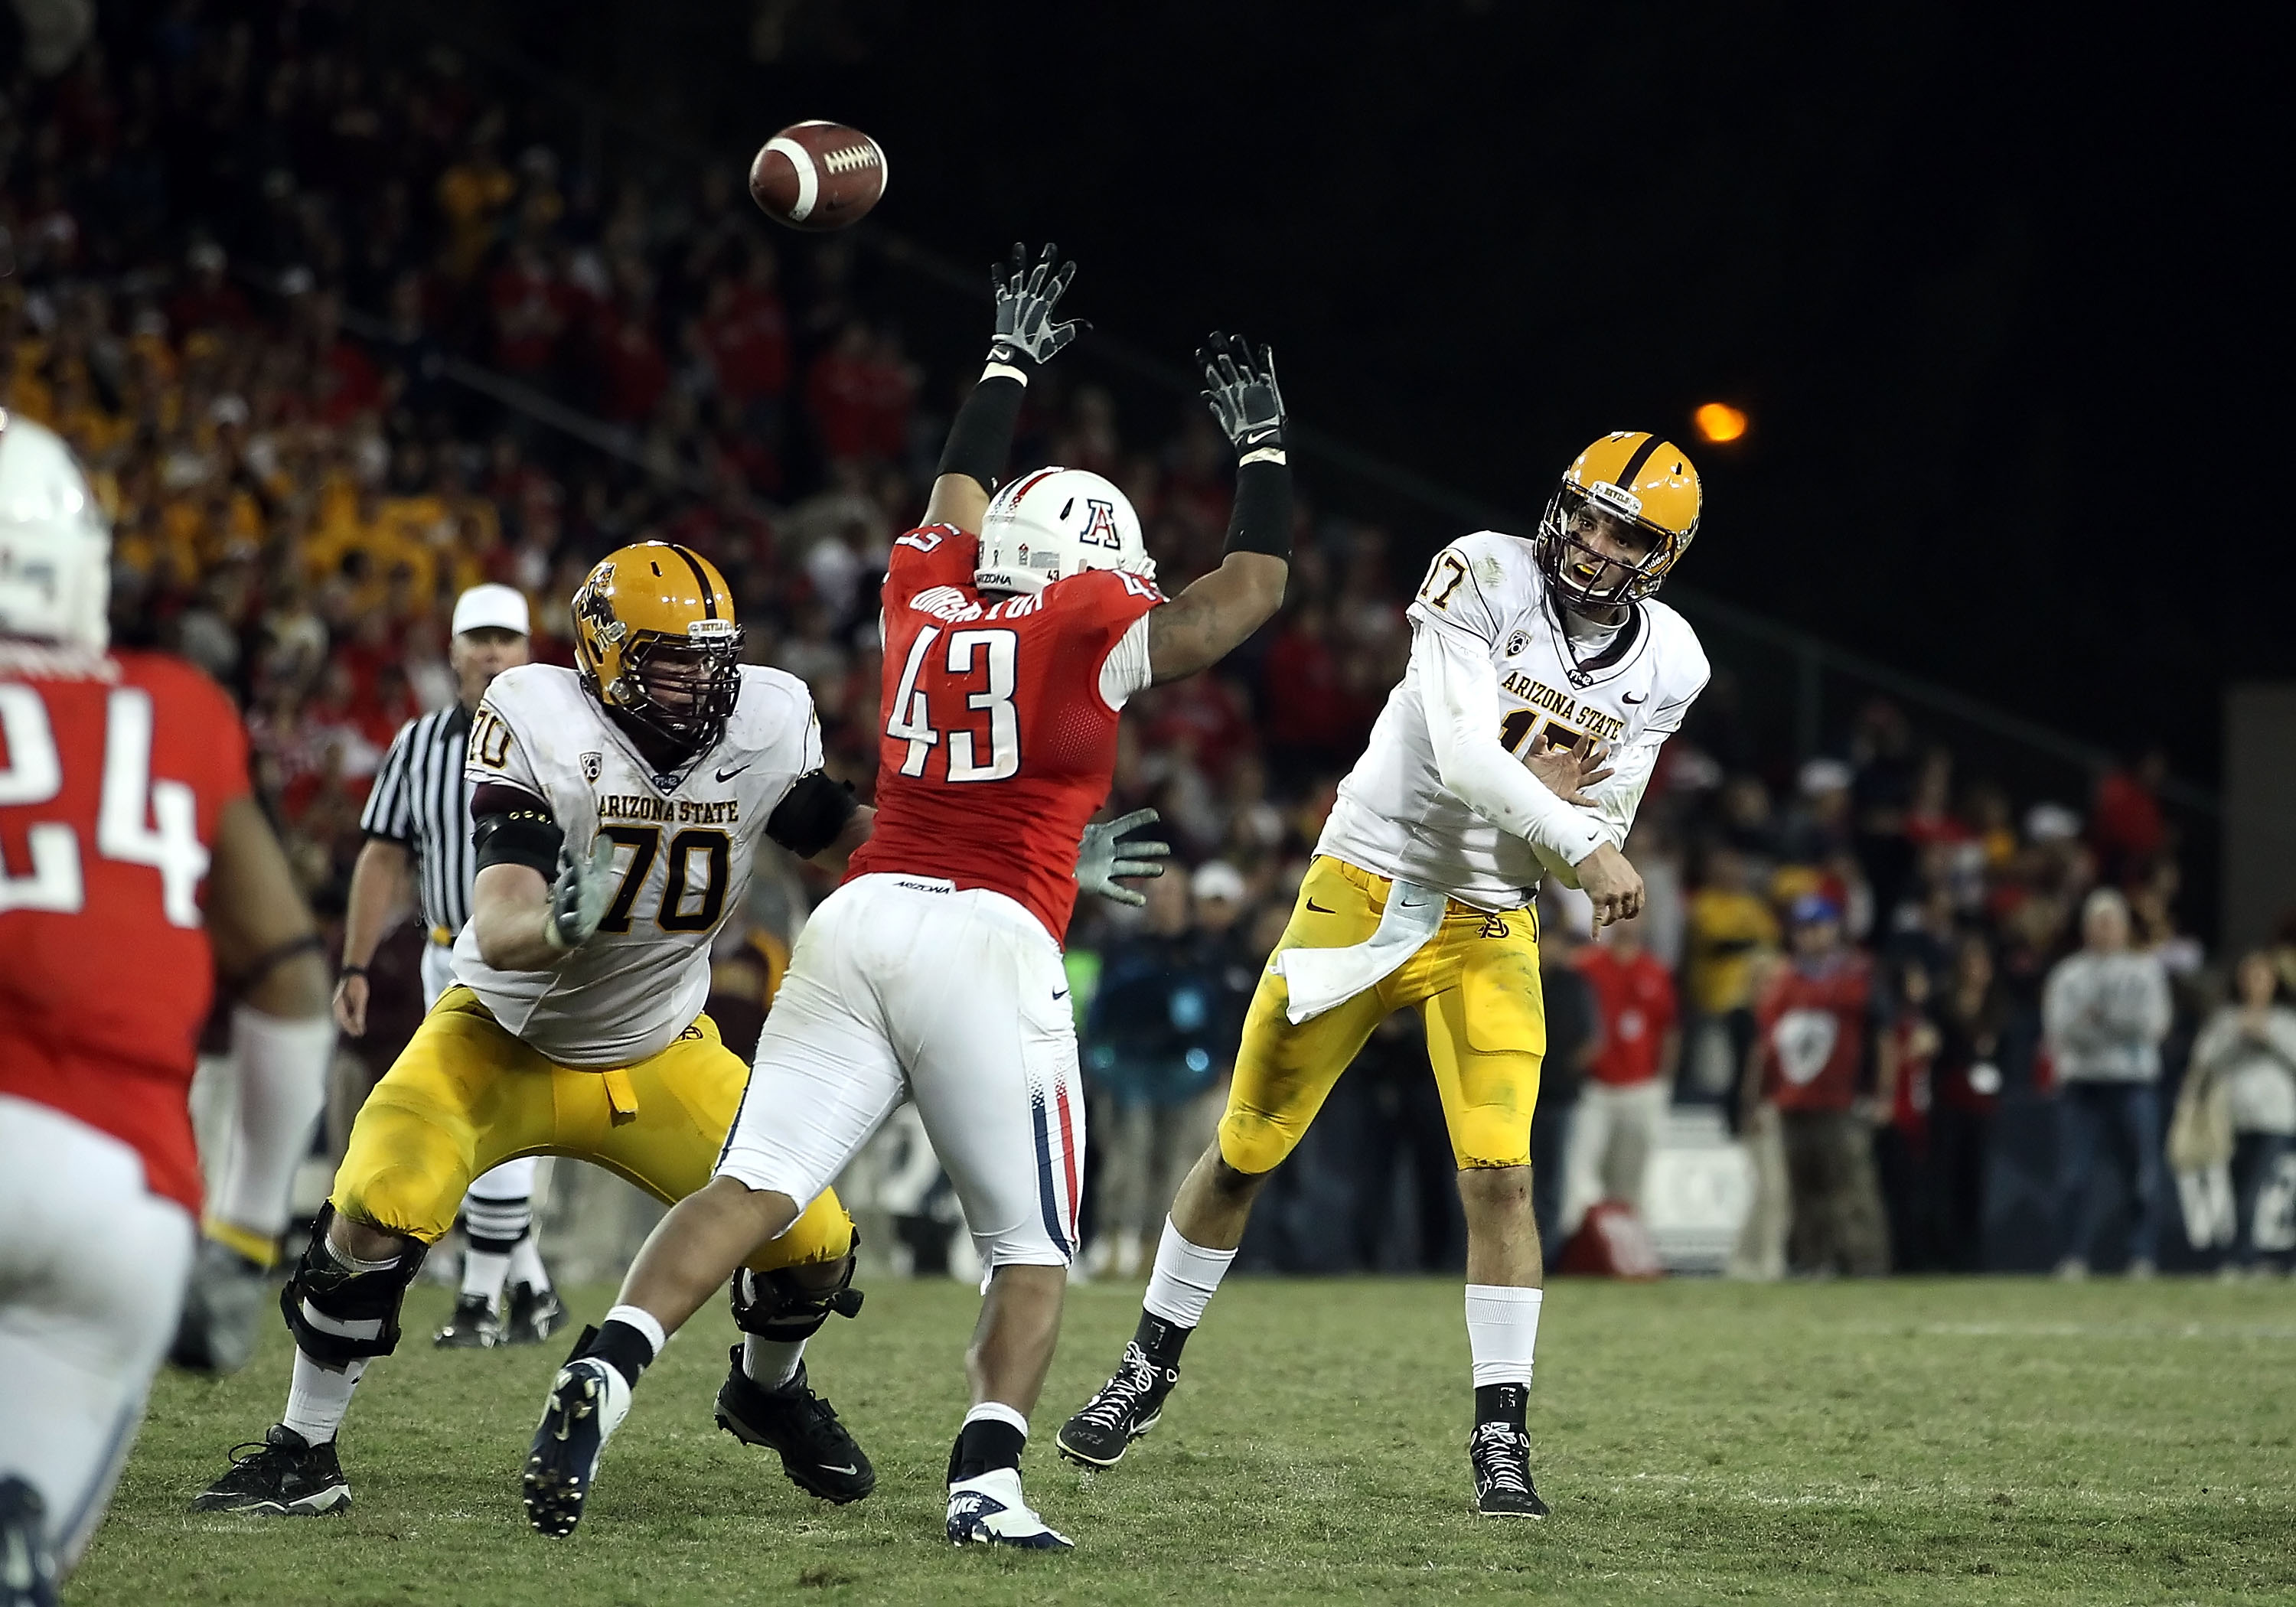 TUCSON, AZ - DECEMBER 02:  Quarterback Brock Osweiler #17 of the Arizona State Sun Devils throws a pass during the college football game at Arizona Stadium on December 2, 2010 in Tucson, Arizona. The Sun Devils defeated the Wildcats 30-29 in double overti